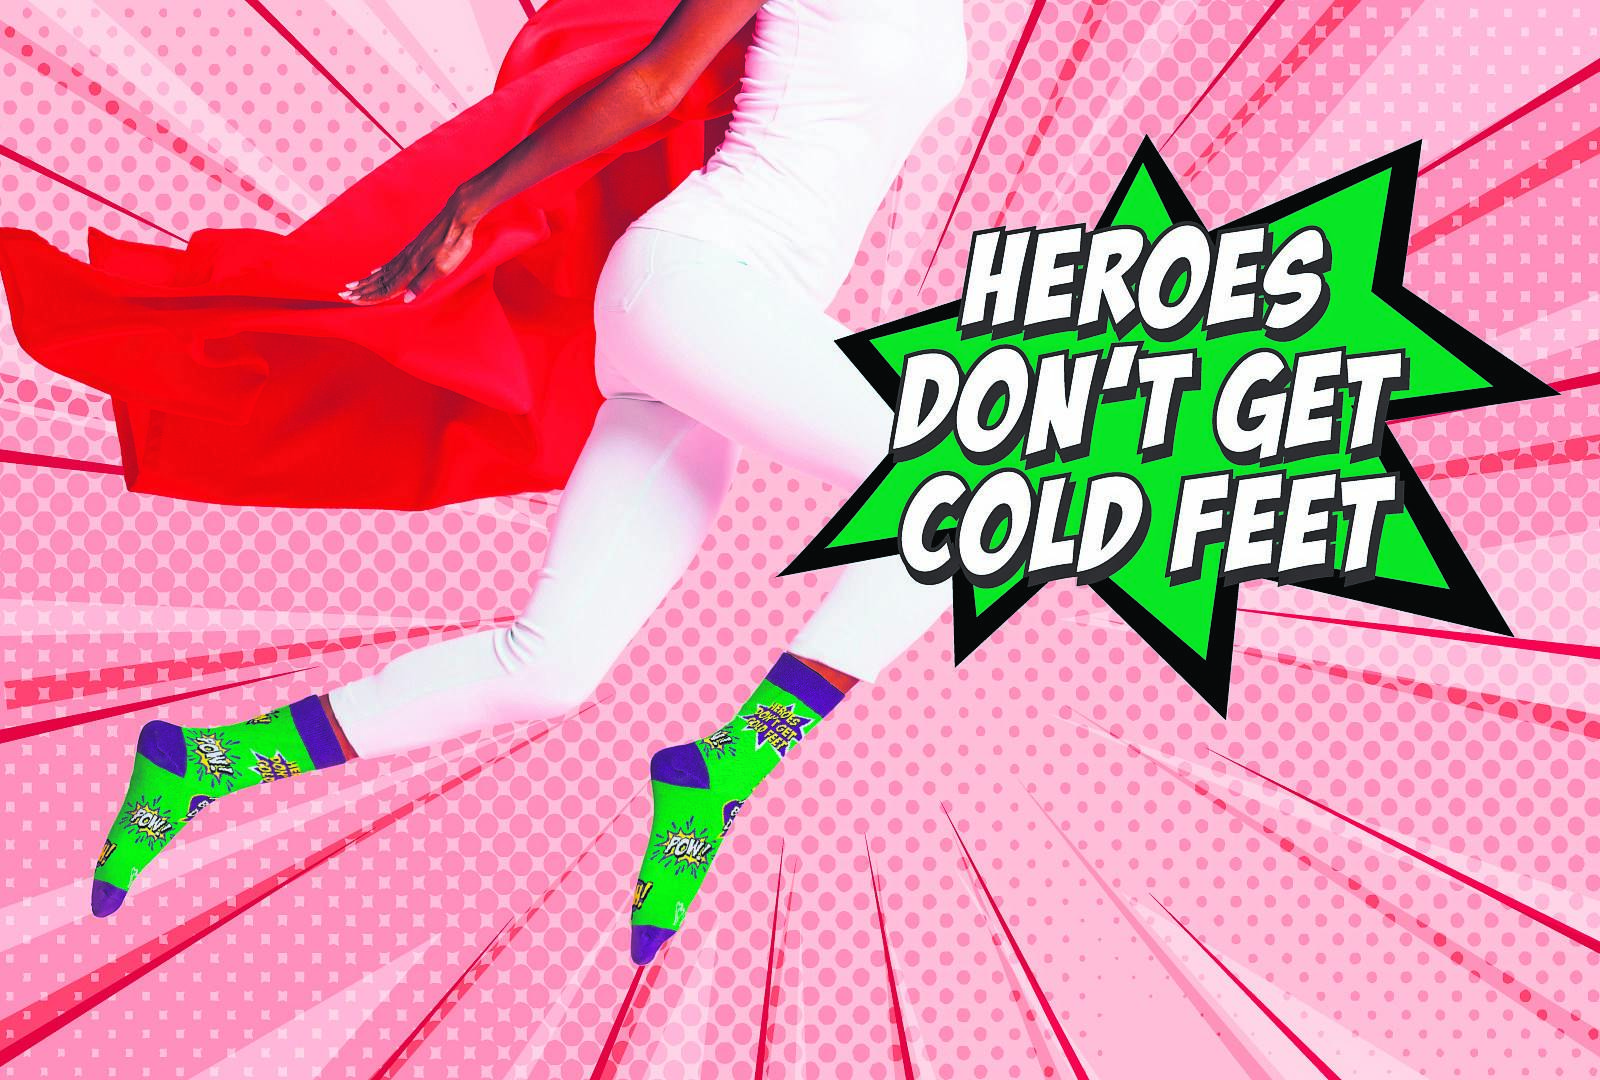 The Western Cape Blood Service’s theme for May is “Heroes don’t get cold feet”, with successful donors getting a unique pair of themed socks from May to August.